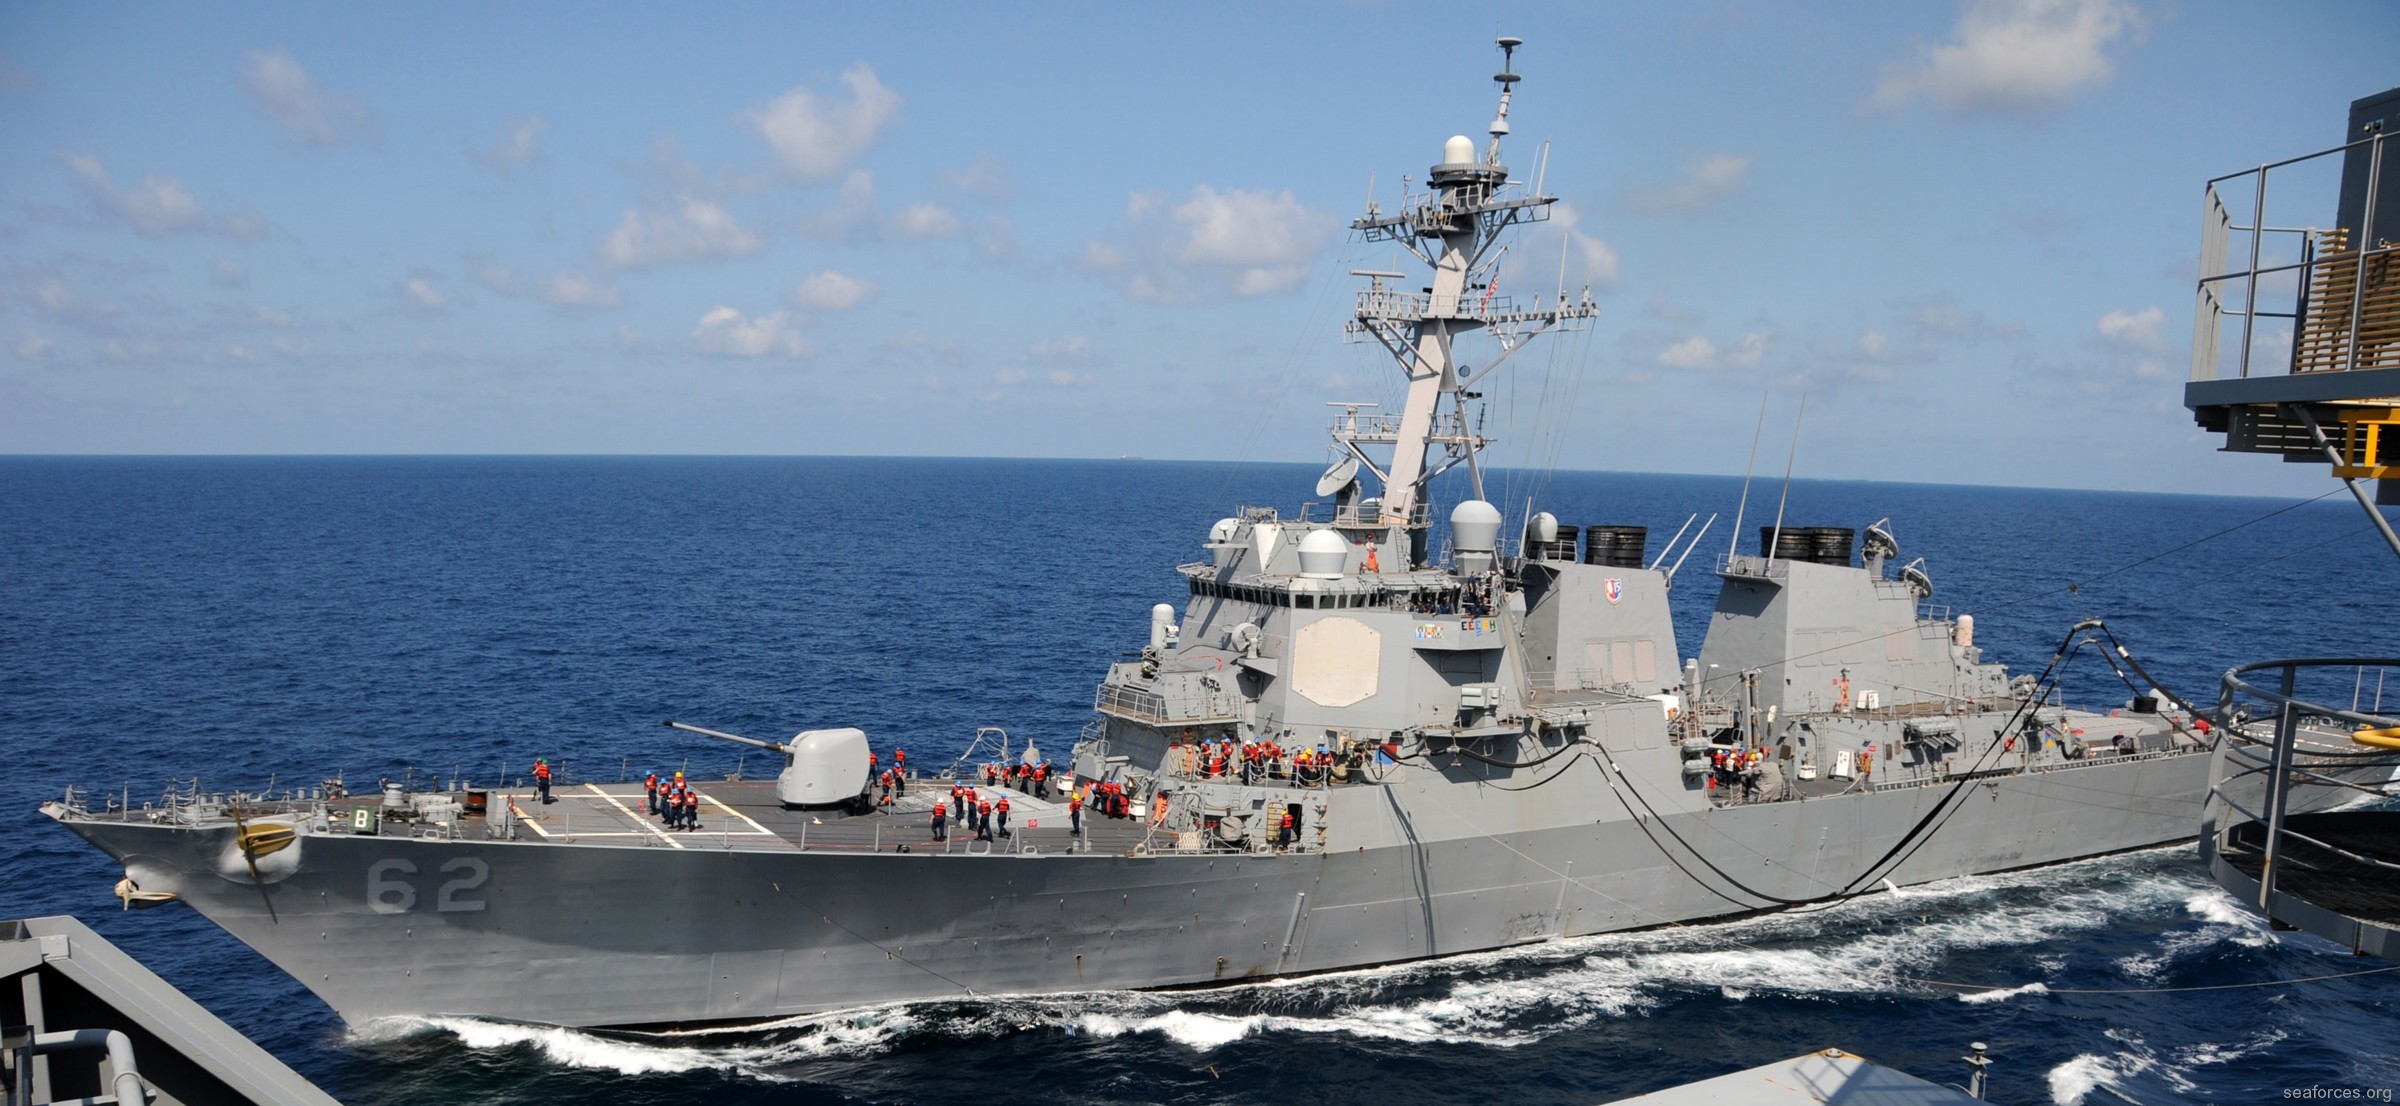 ddg-62 uss fitzgerald guided missile destroyer 2013 40 south china sea